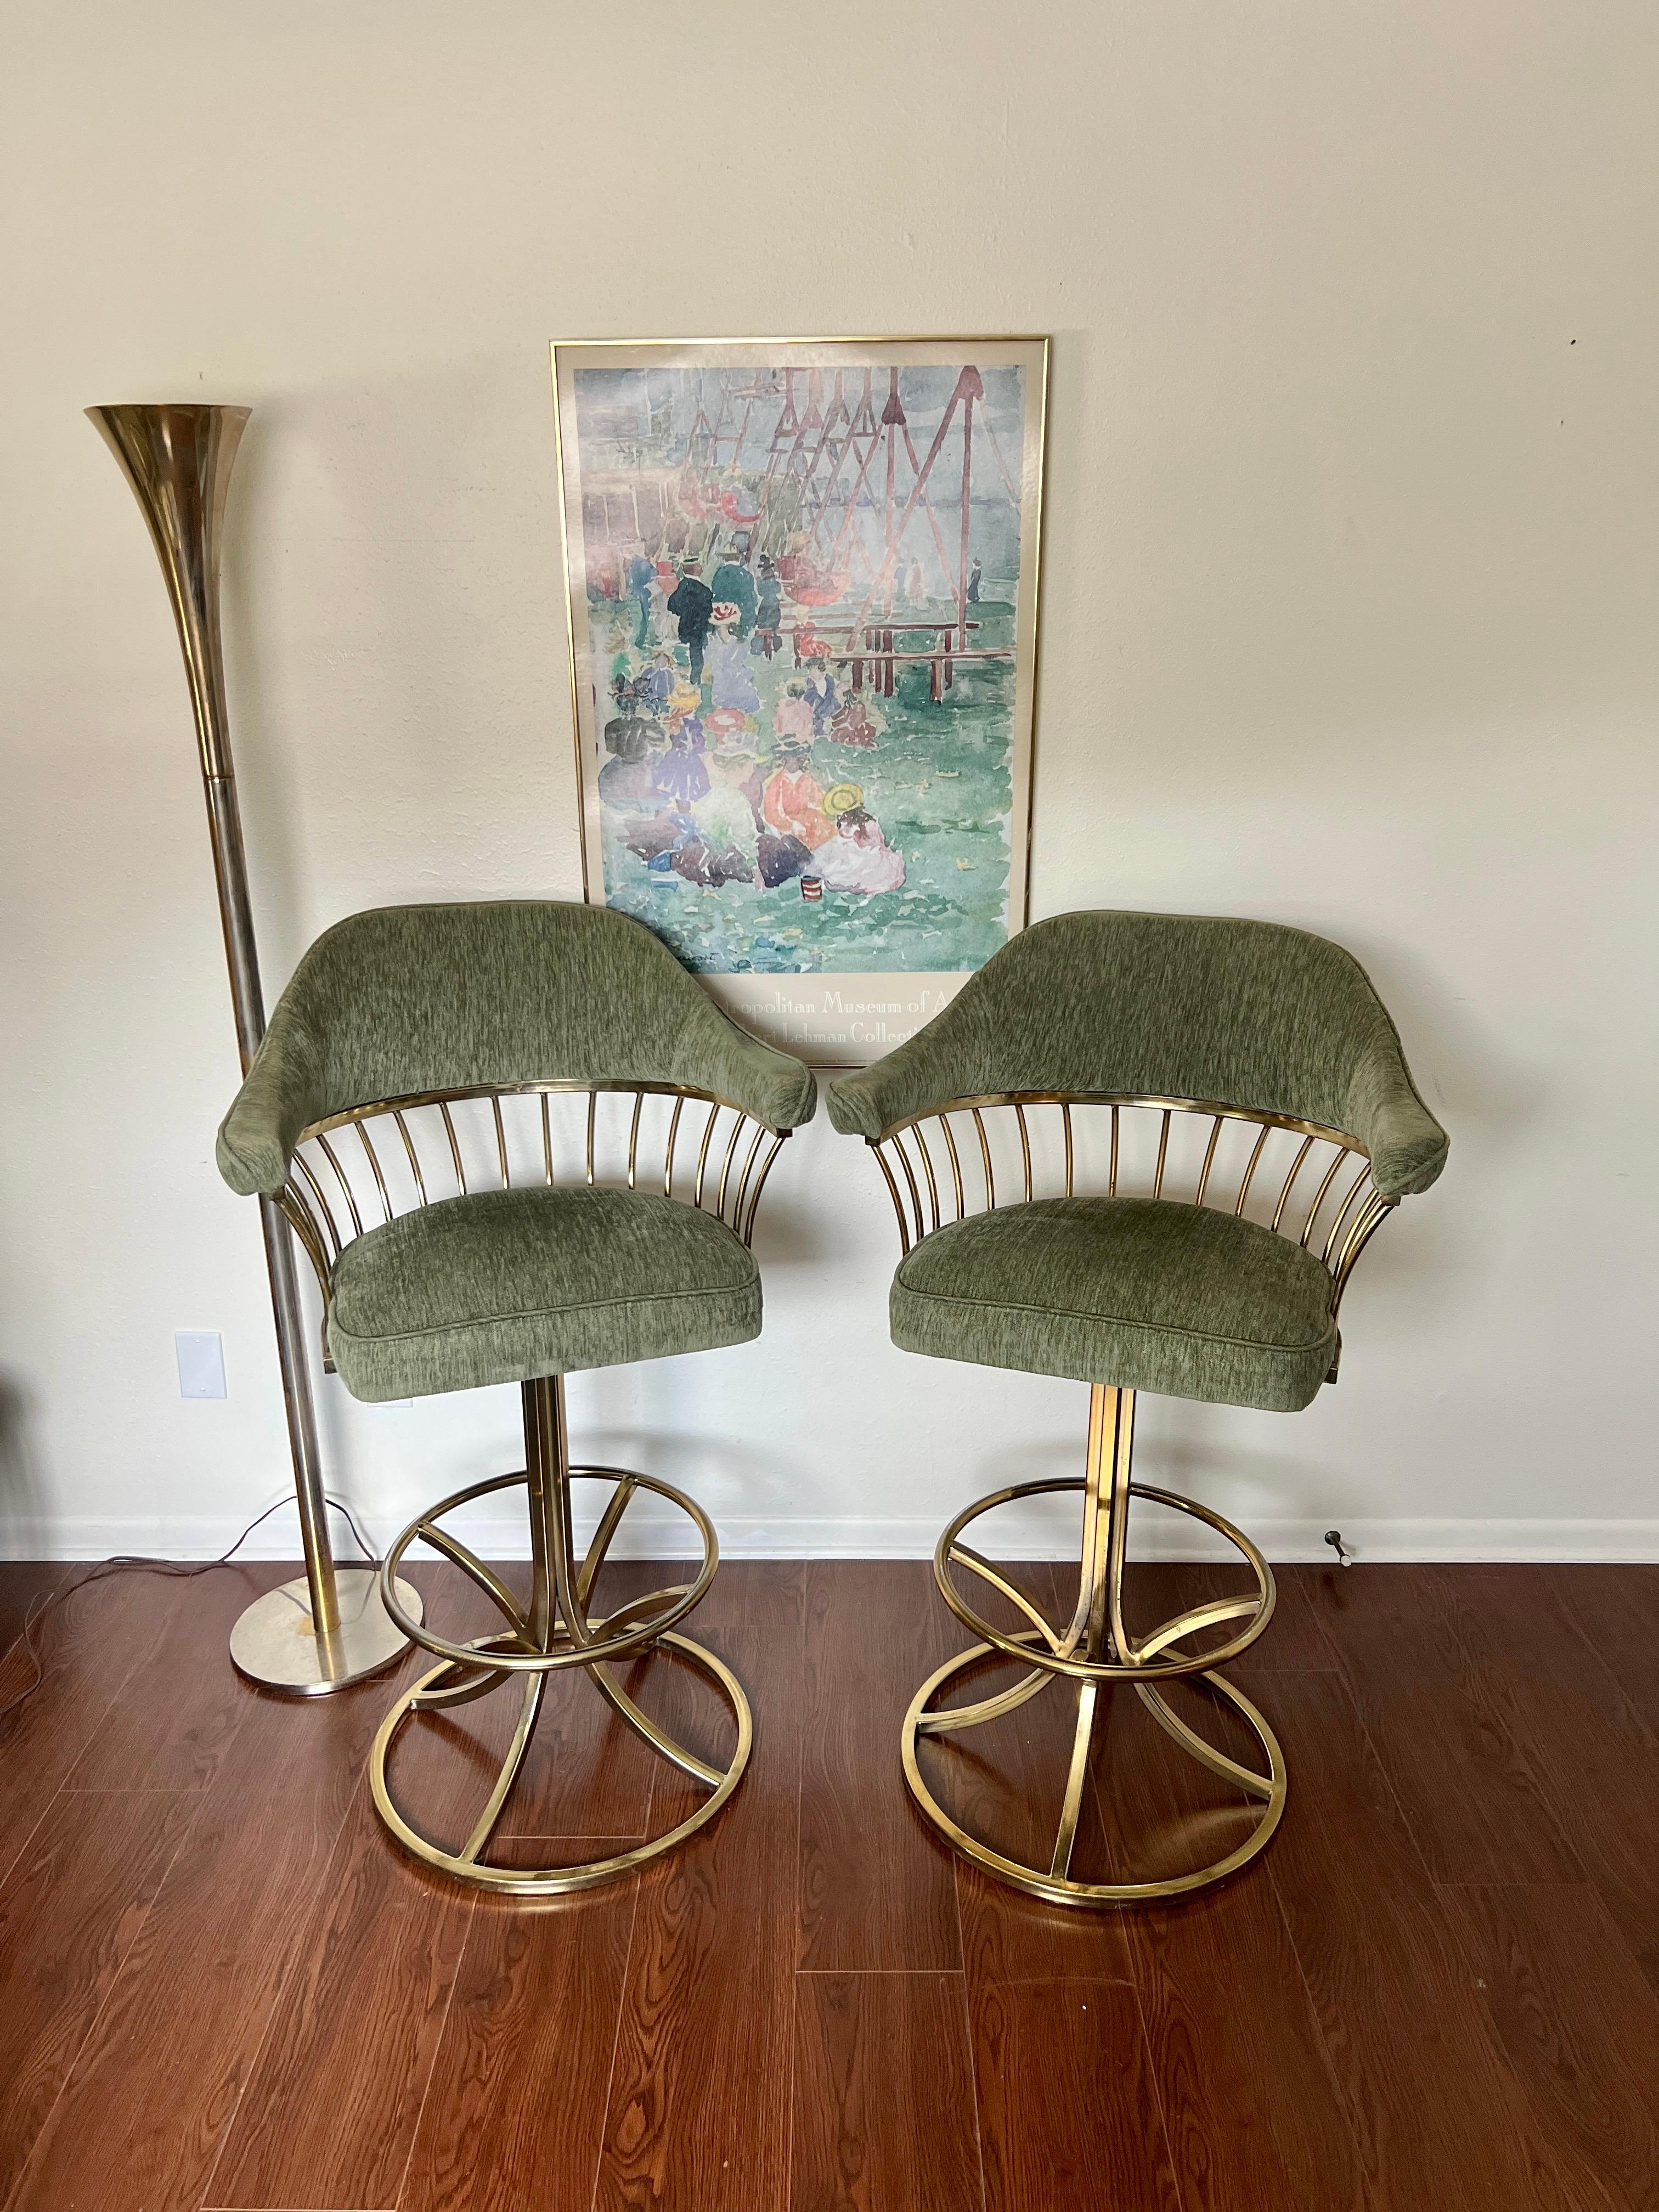 Metal Vintage gold swivel barstools with the original velvety fabric, circa 1970s